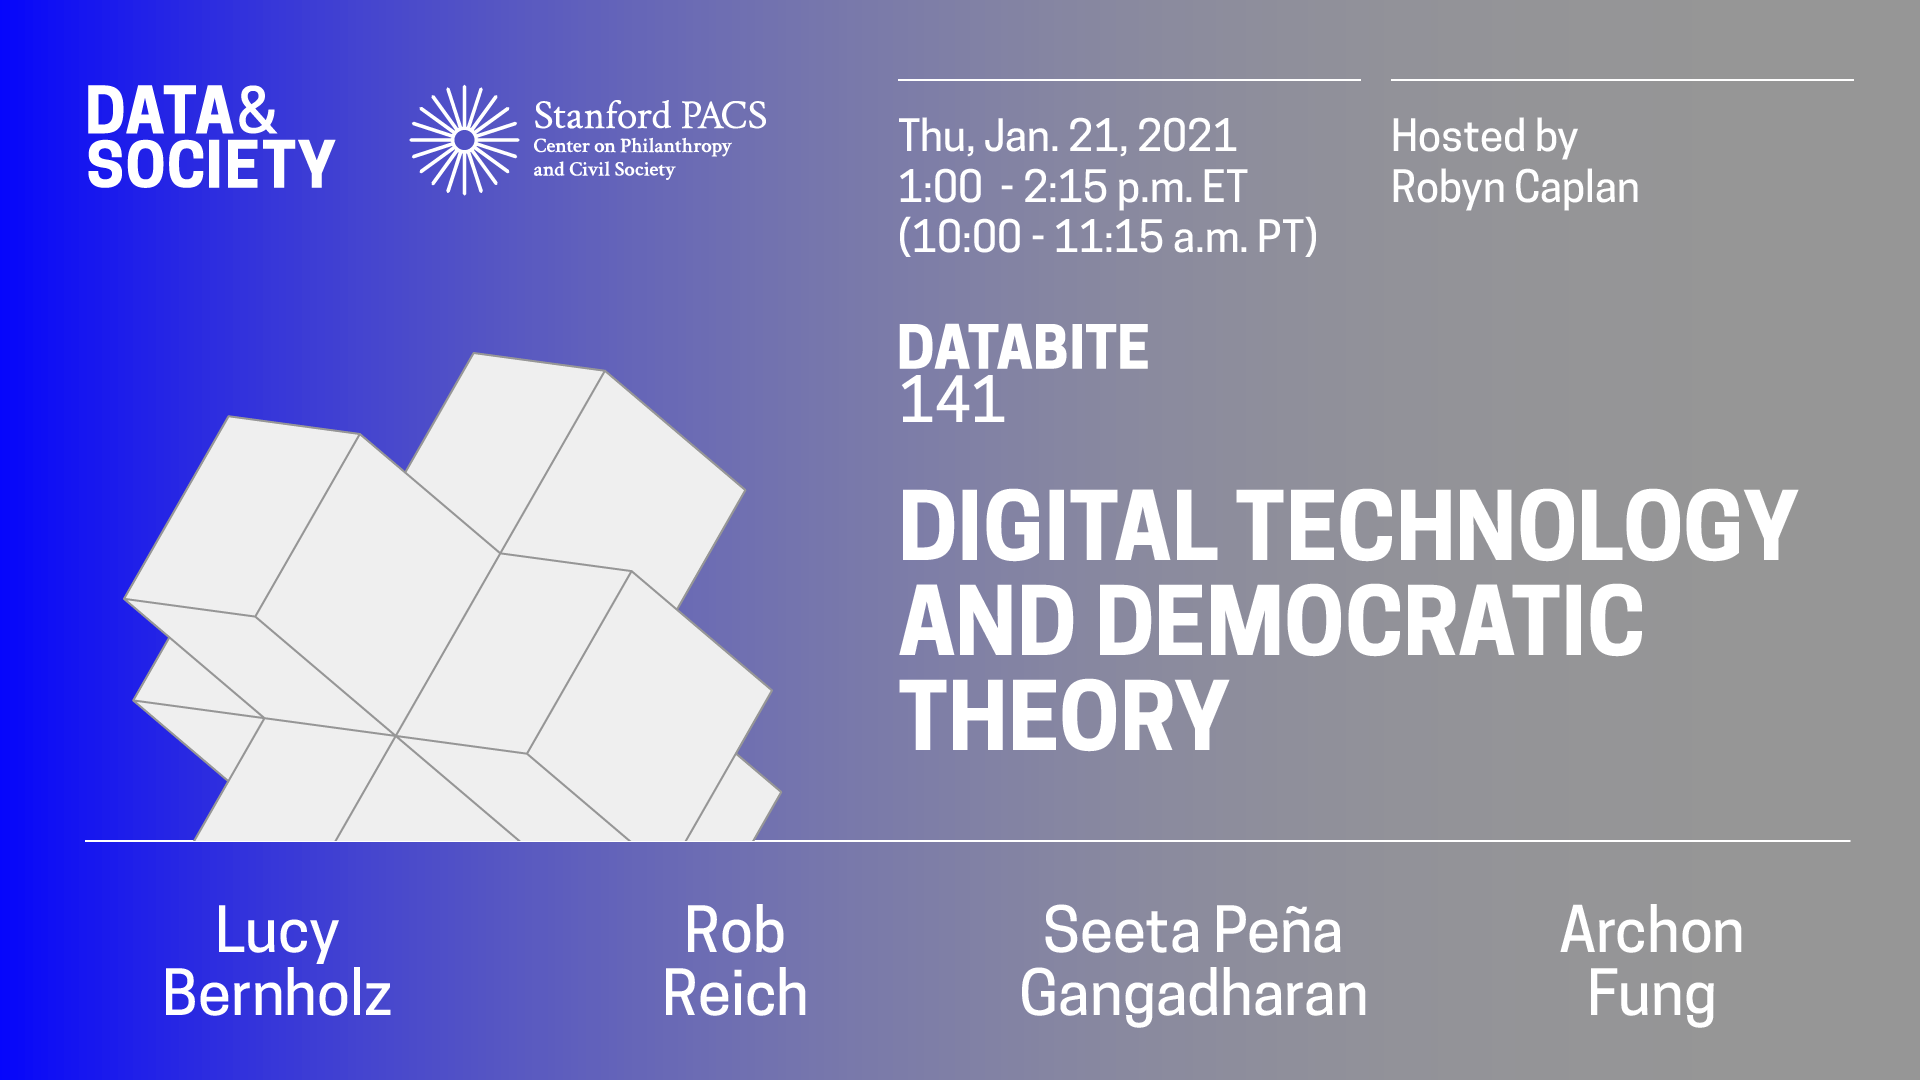 Digital Technology and Democratic Theory